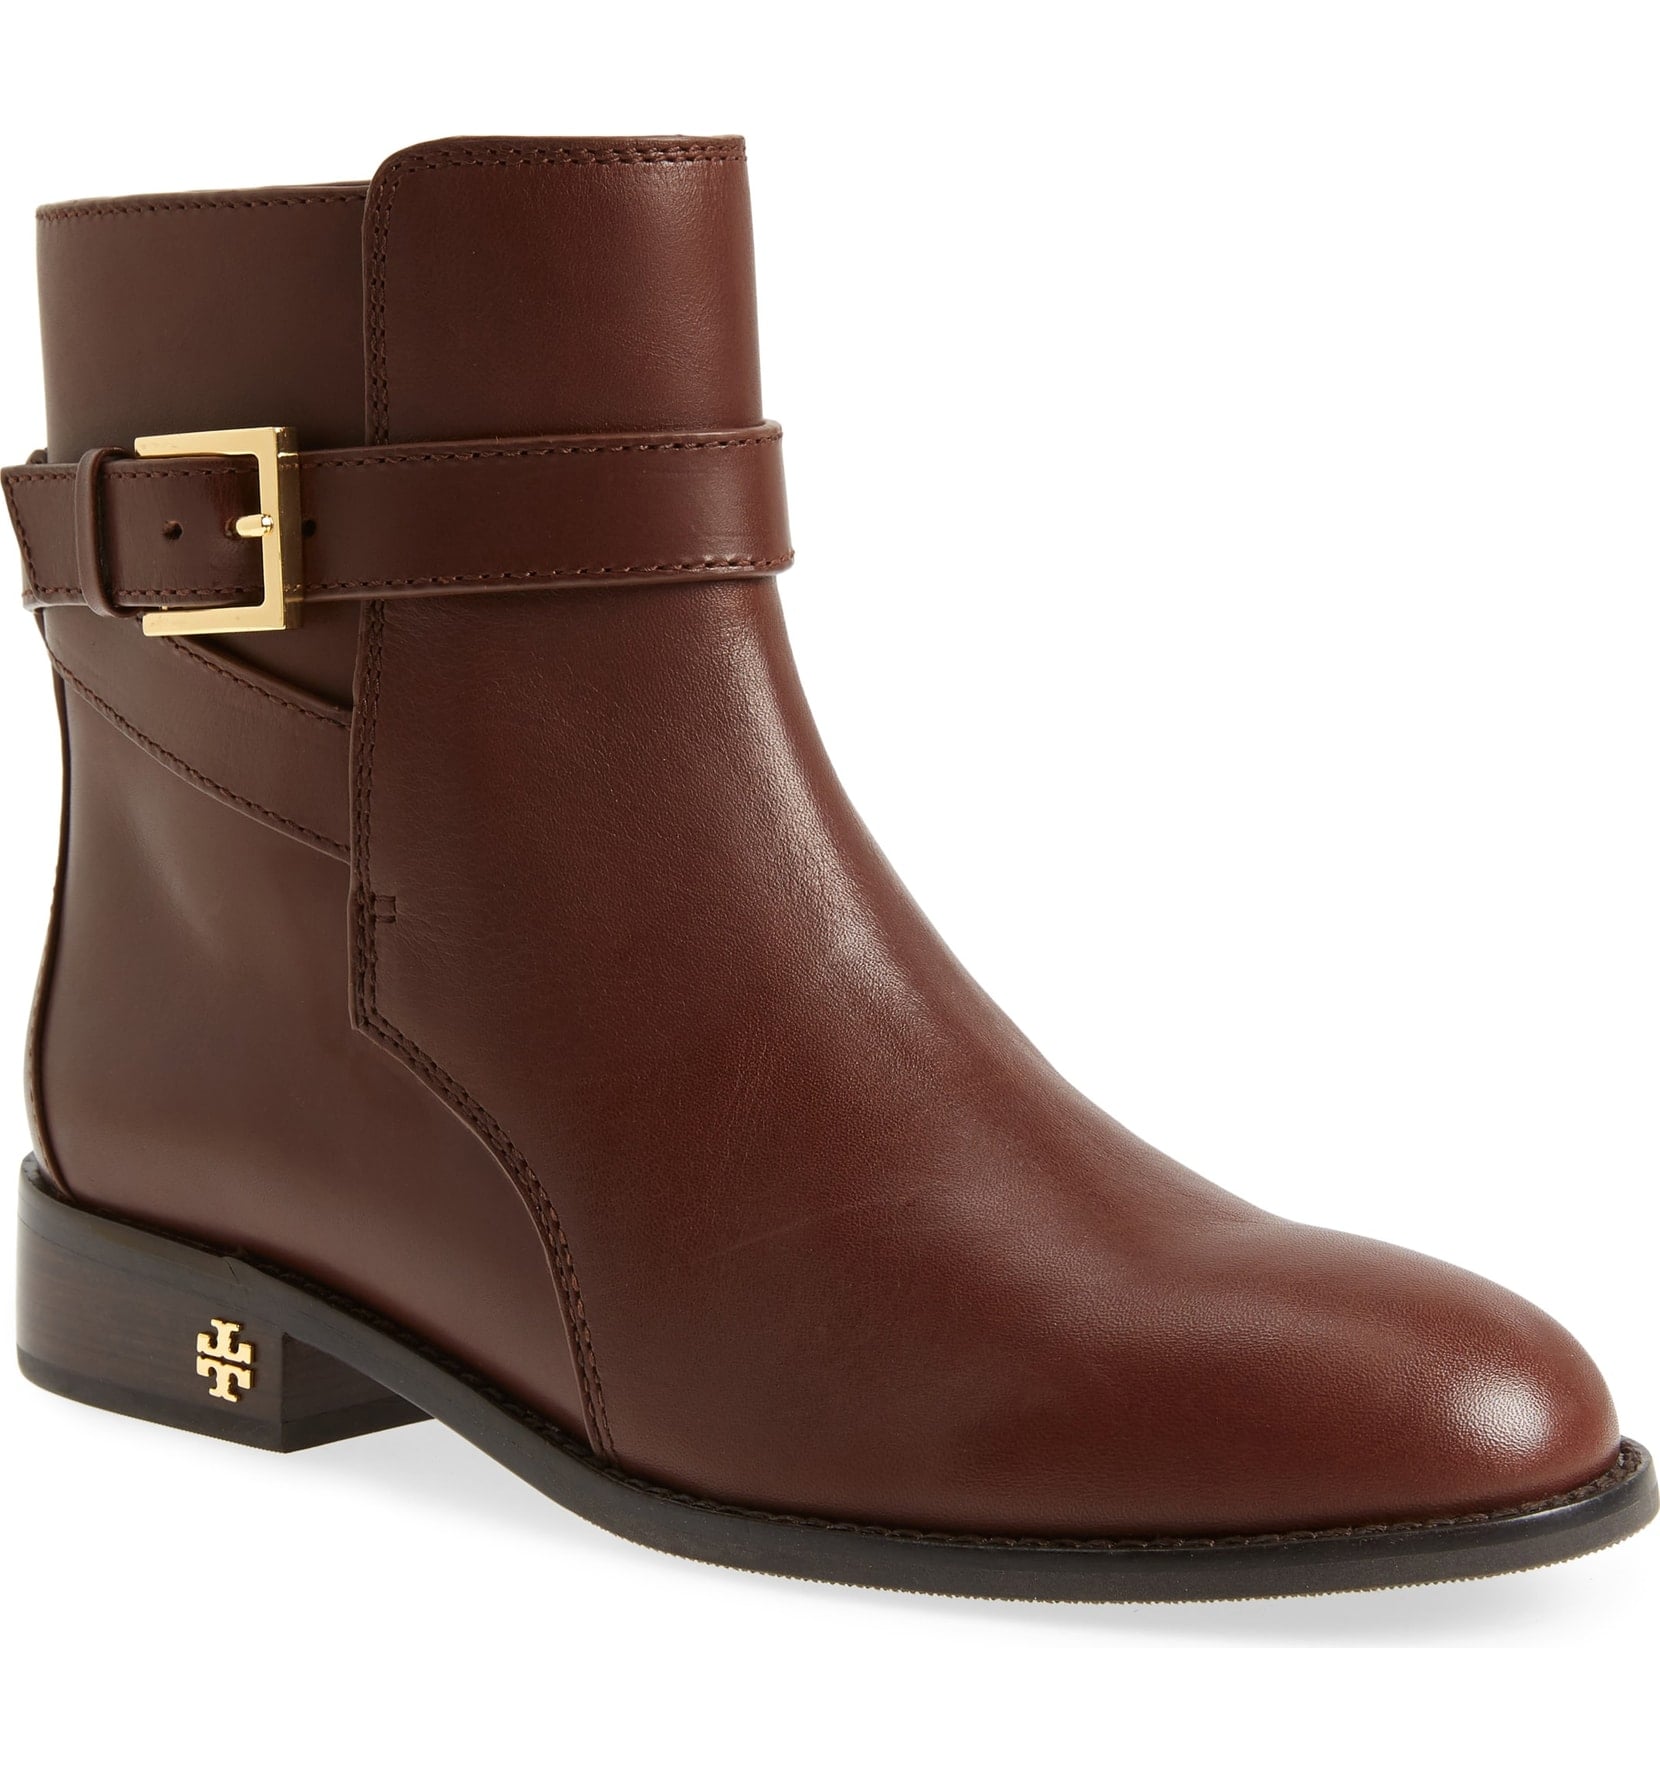 Tory Burch Brooke Booties | 10 New Tory Burch Shoes We're Dreaming About  This Fall | POPSUGAR Fashion Photo 8